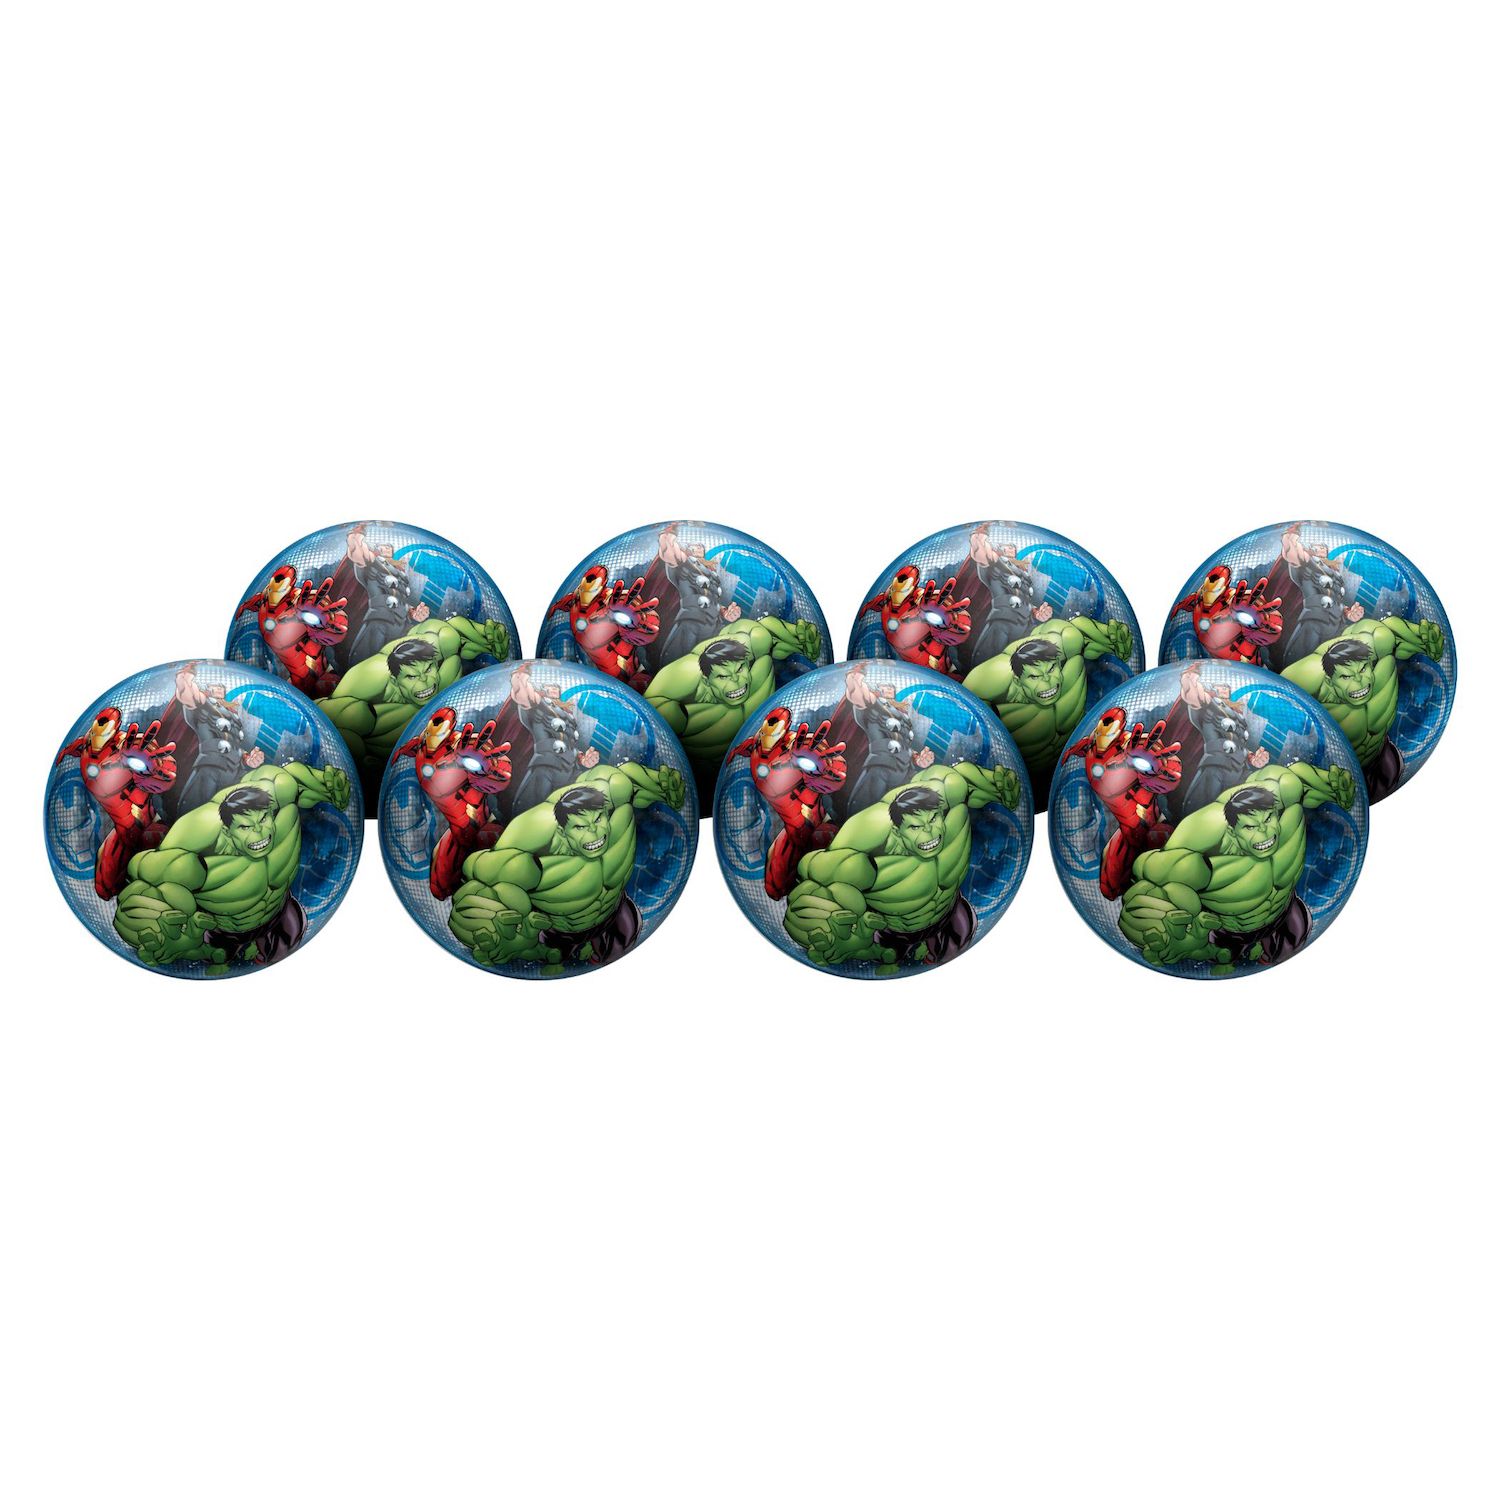 Image for Hedstrom Avengers 8-Pack Playball Party Pack at Kohl's.